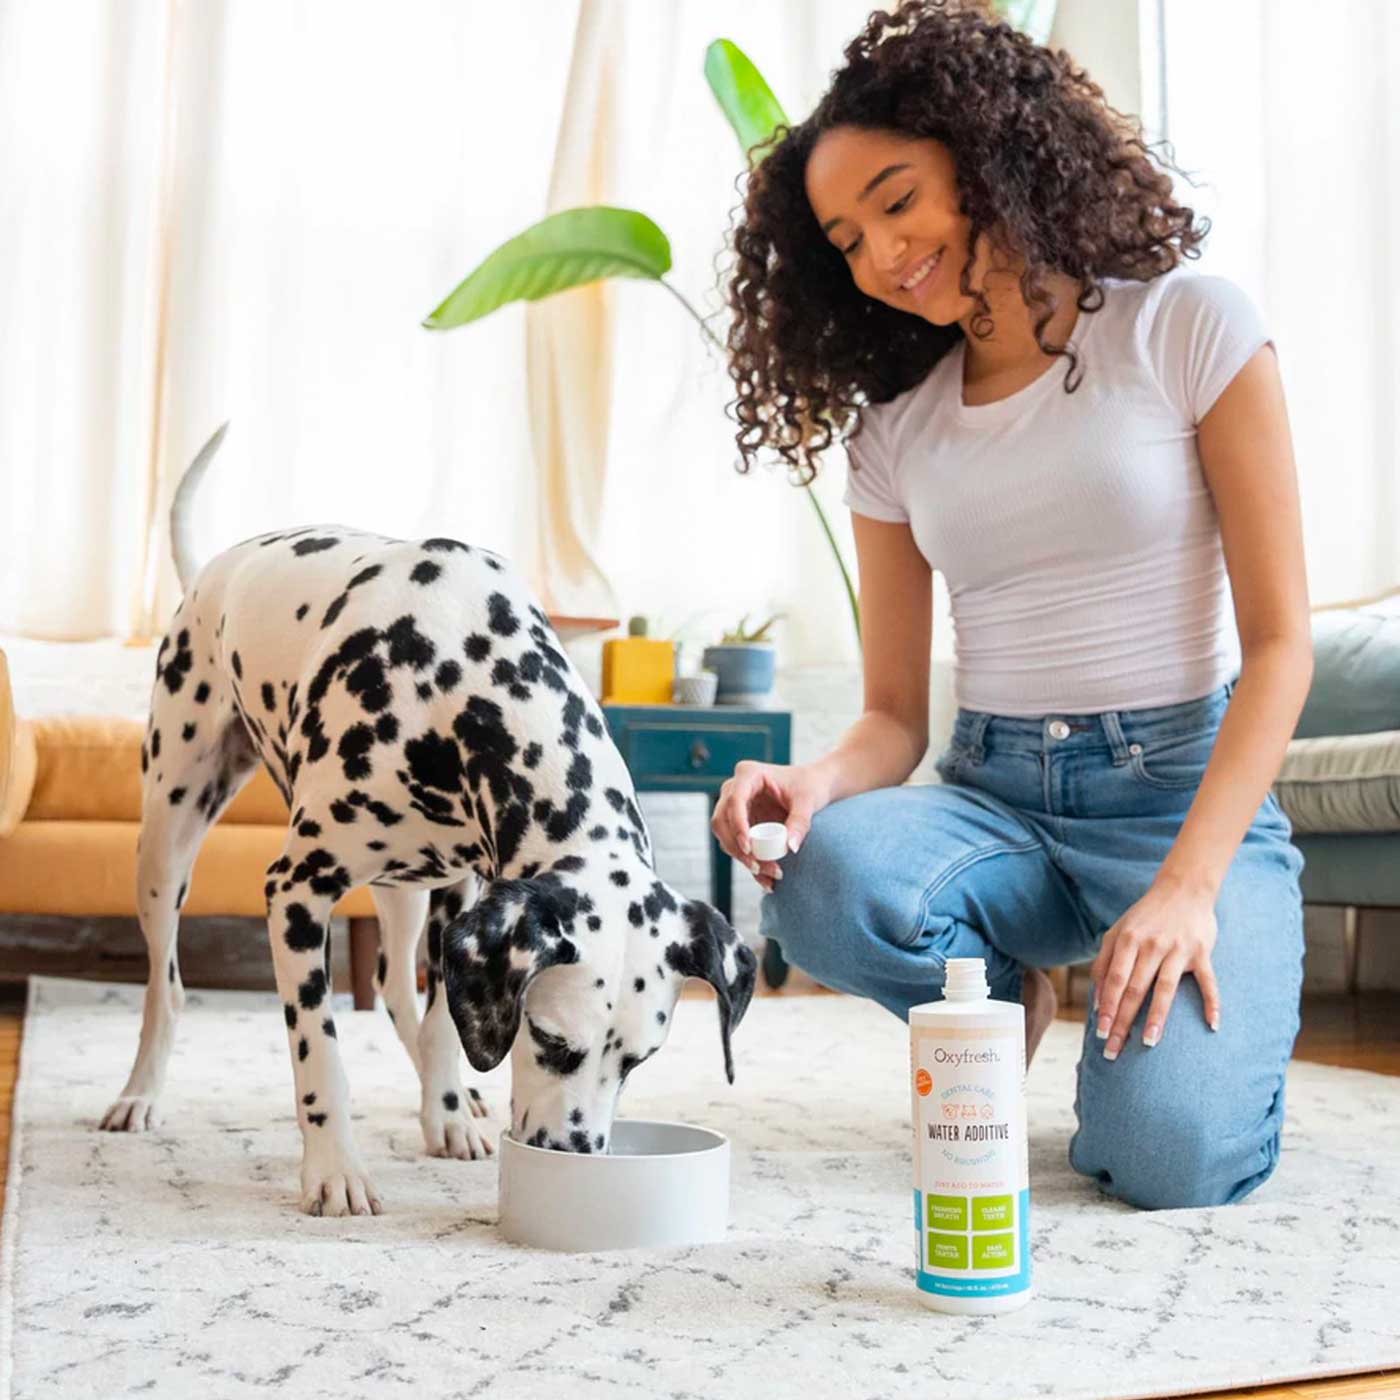 dalmation drinking out of water bowl with oxyfresh pet water additive for fresh breath and good dental health 